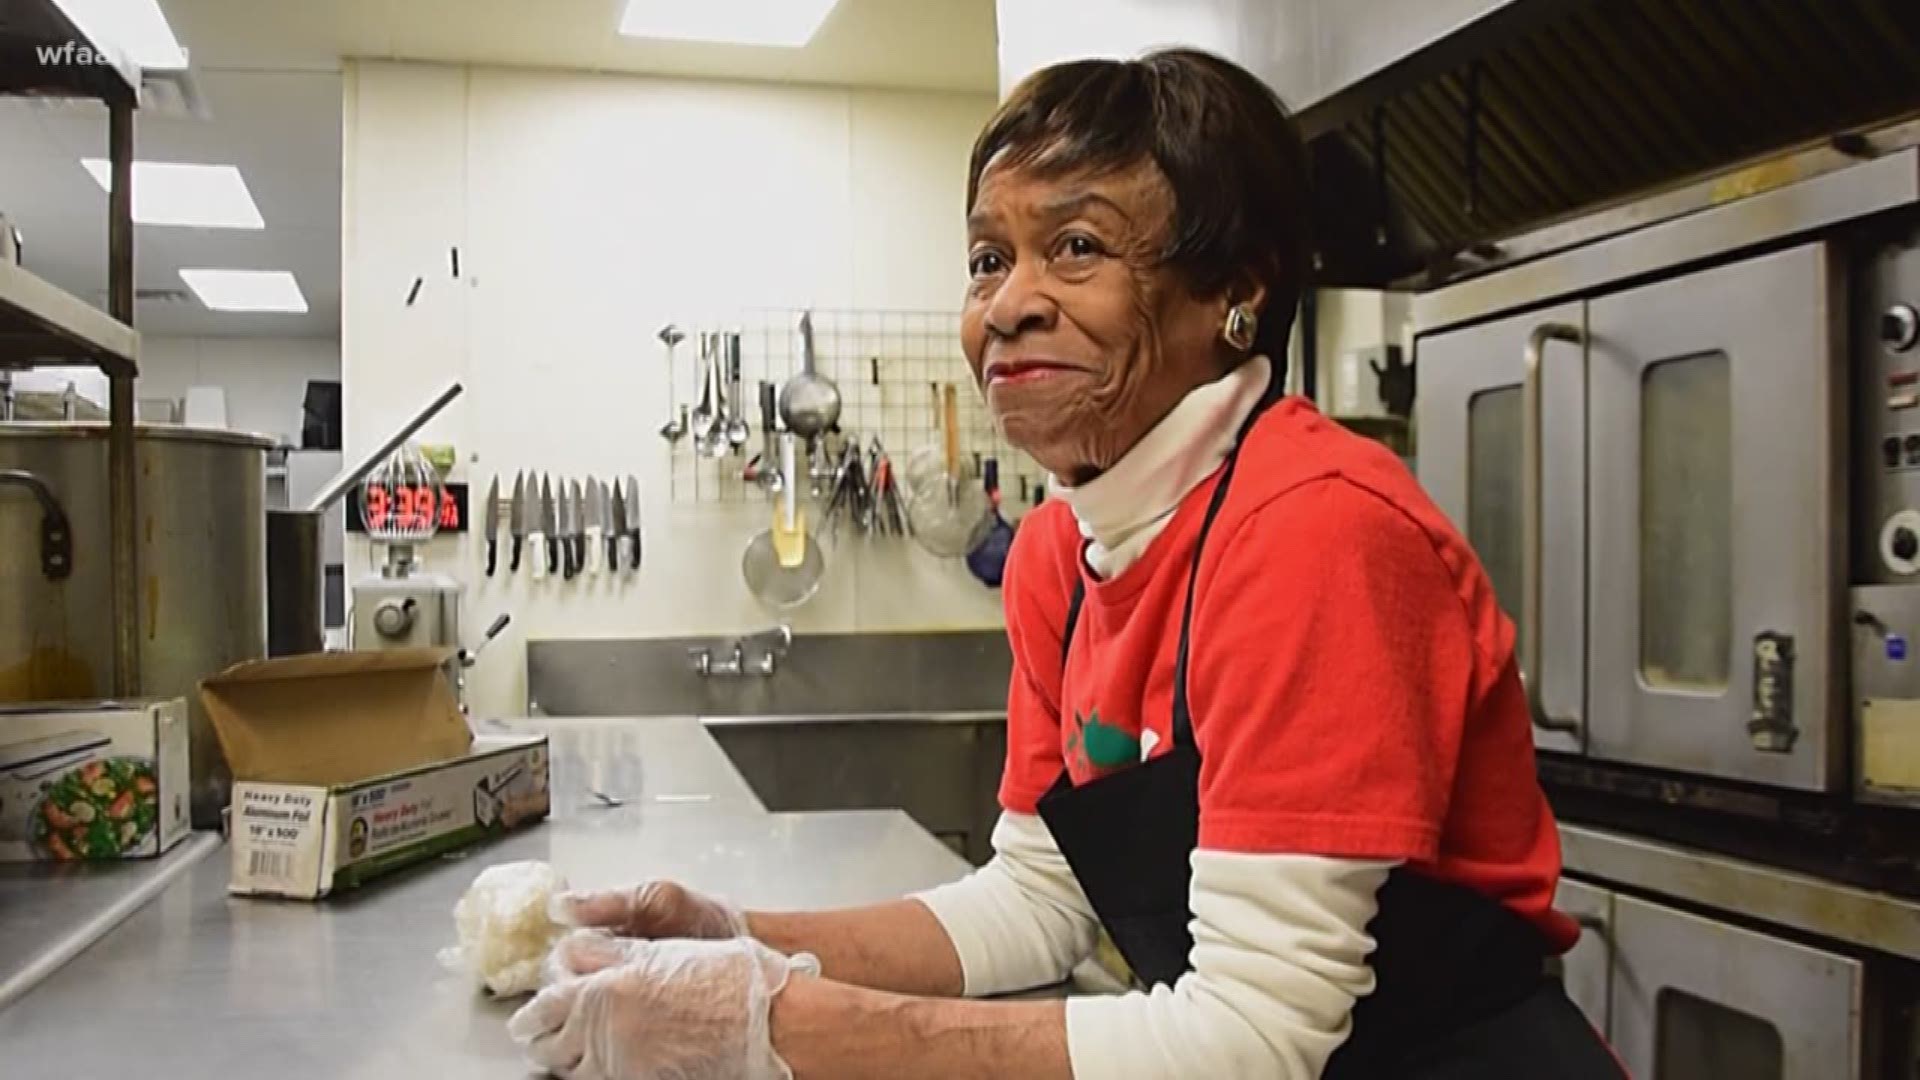 At 85-years-young, local culinary icon Ruth Hauntz continues to break down barriers and inspire everyone around her.